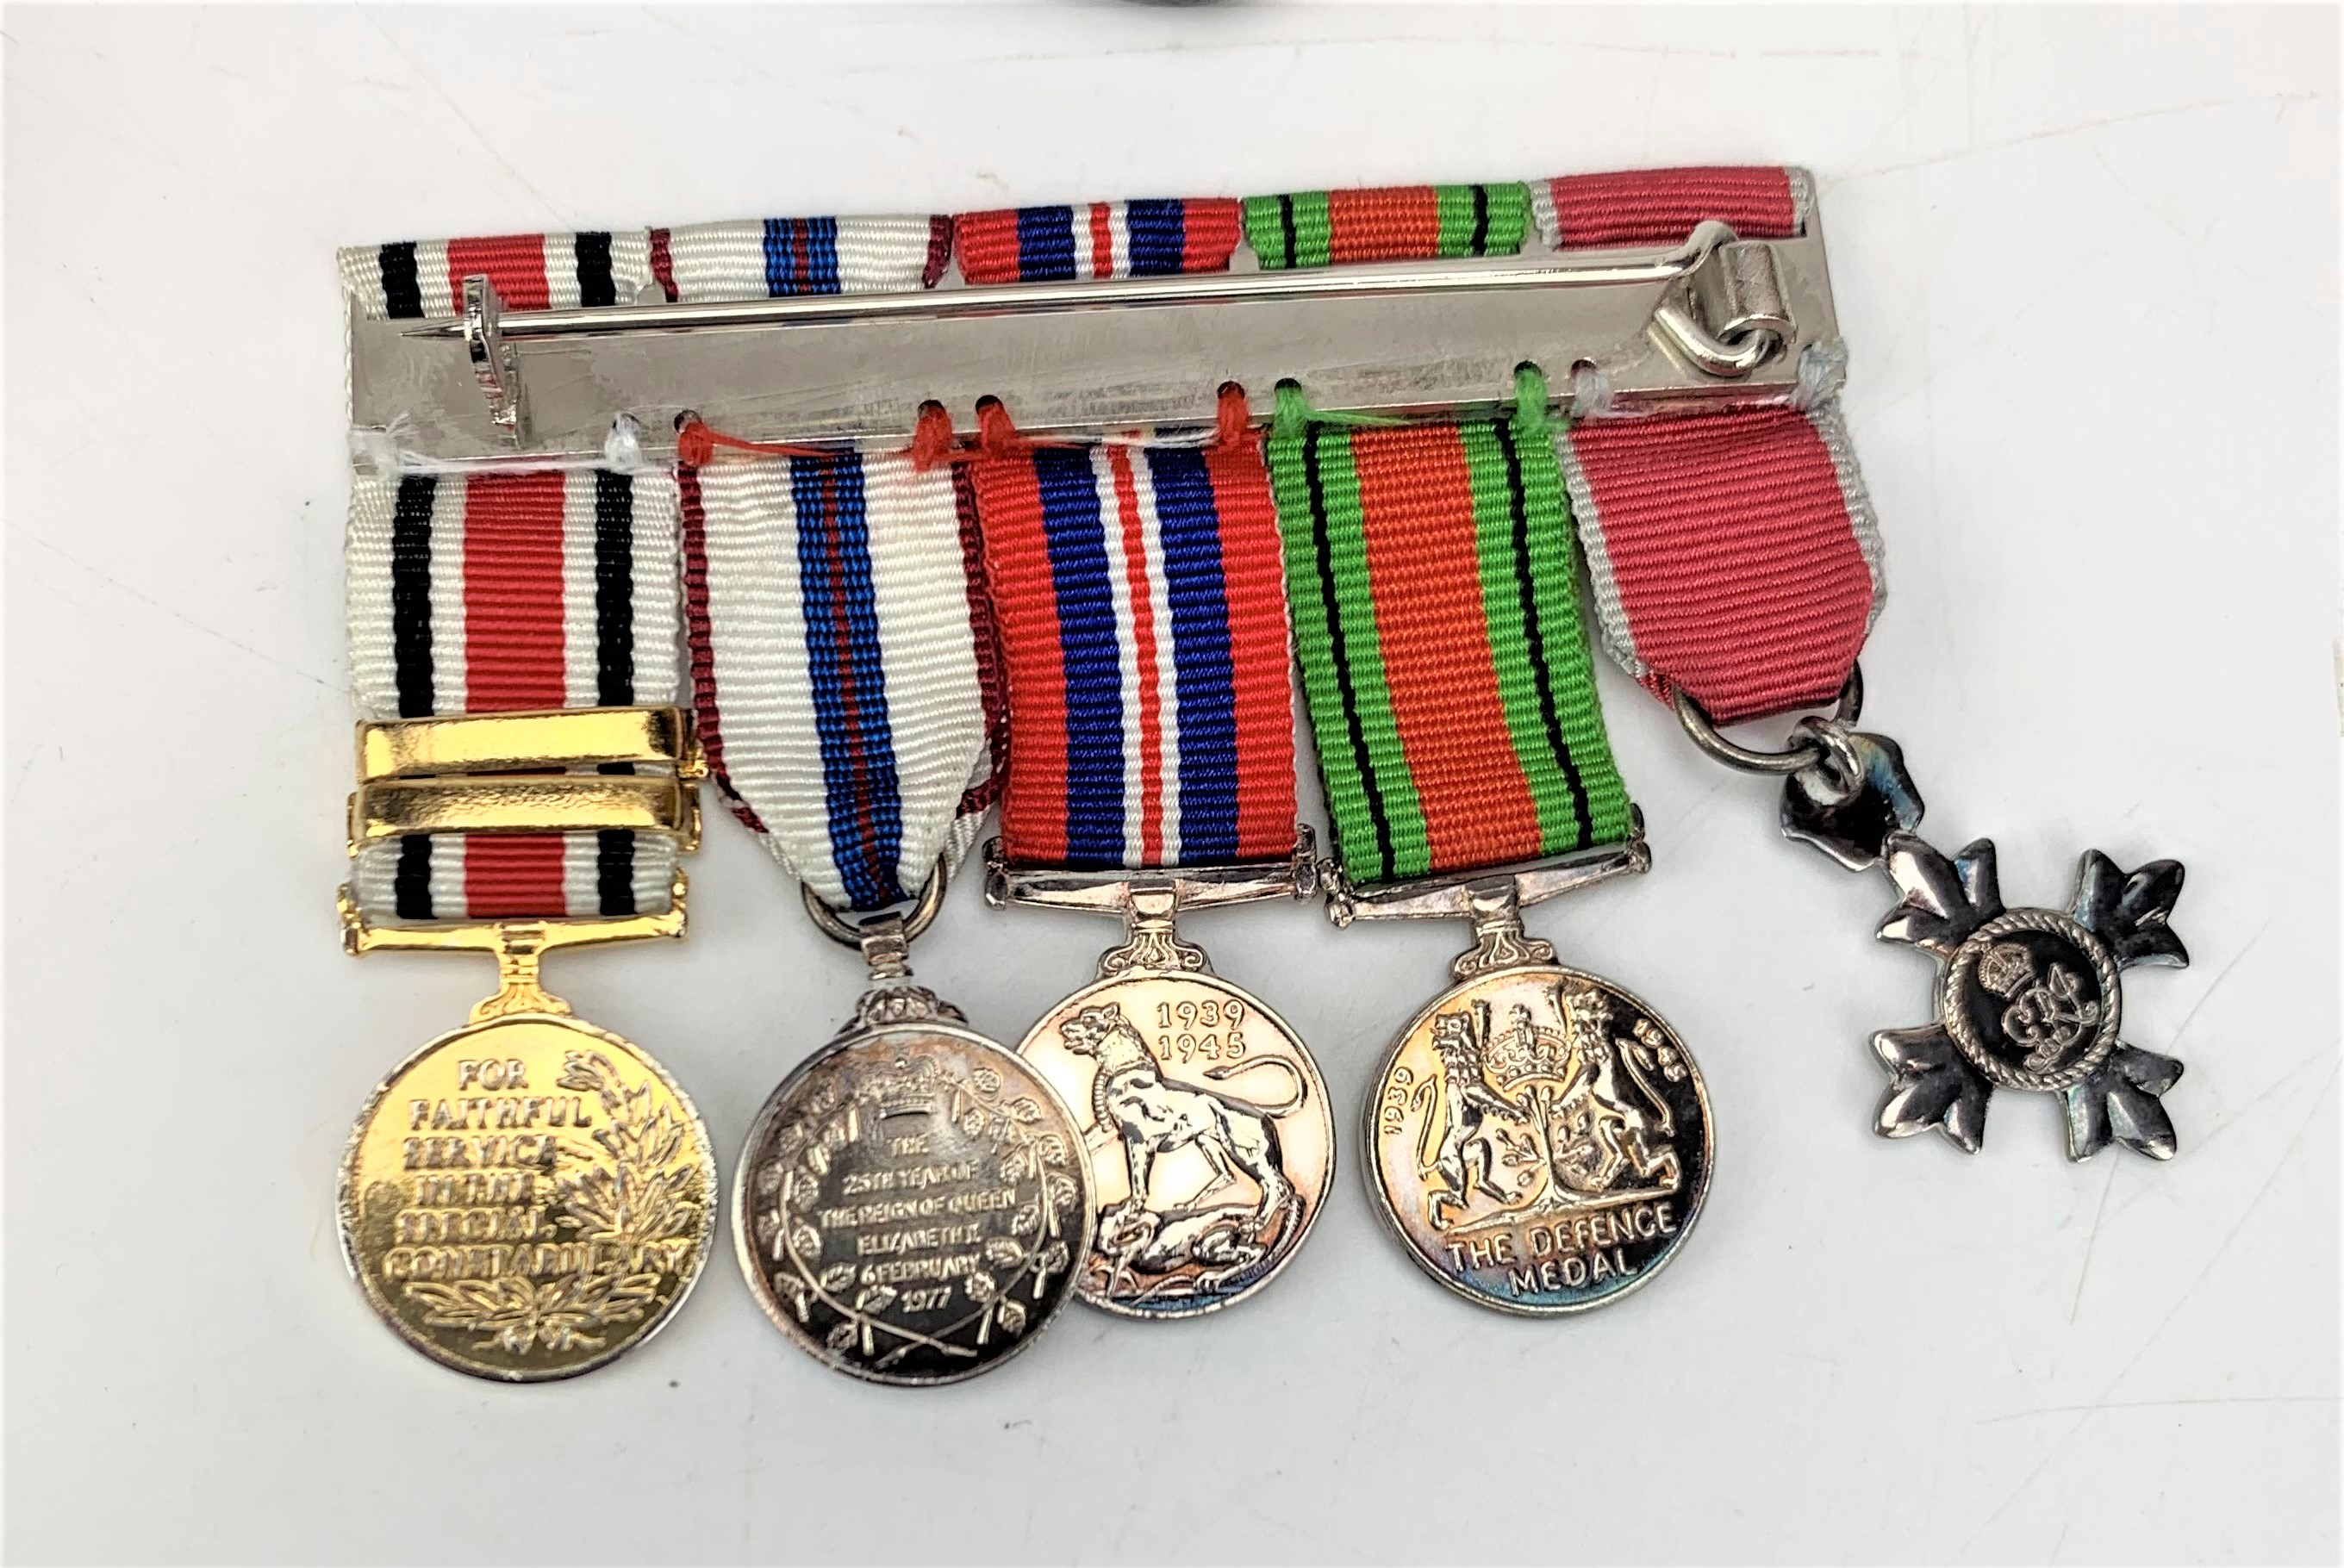 Bar with 2 Second World War Medals and 2 Police Service Medals, miniature medals and MBE medal - Image 11 of 11